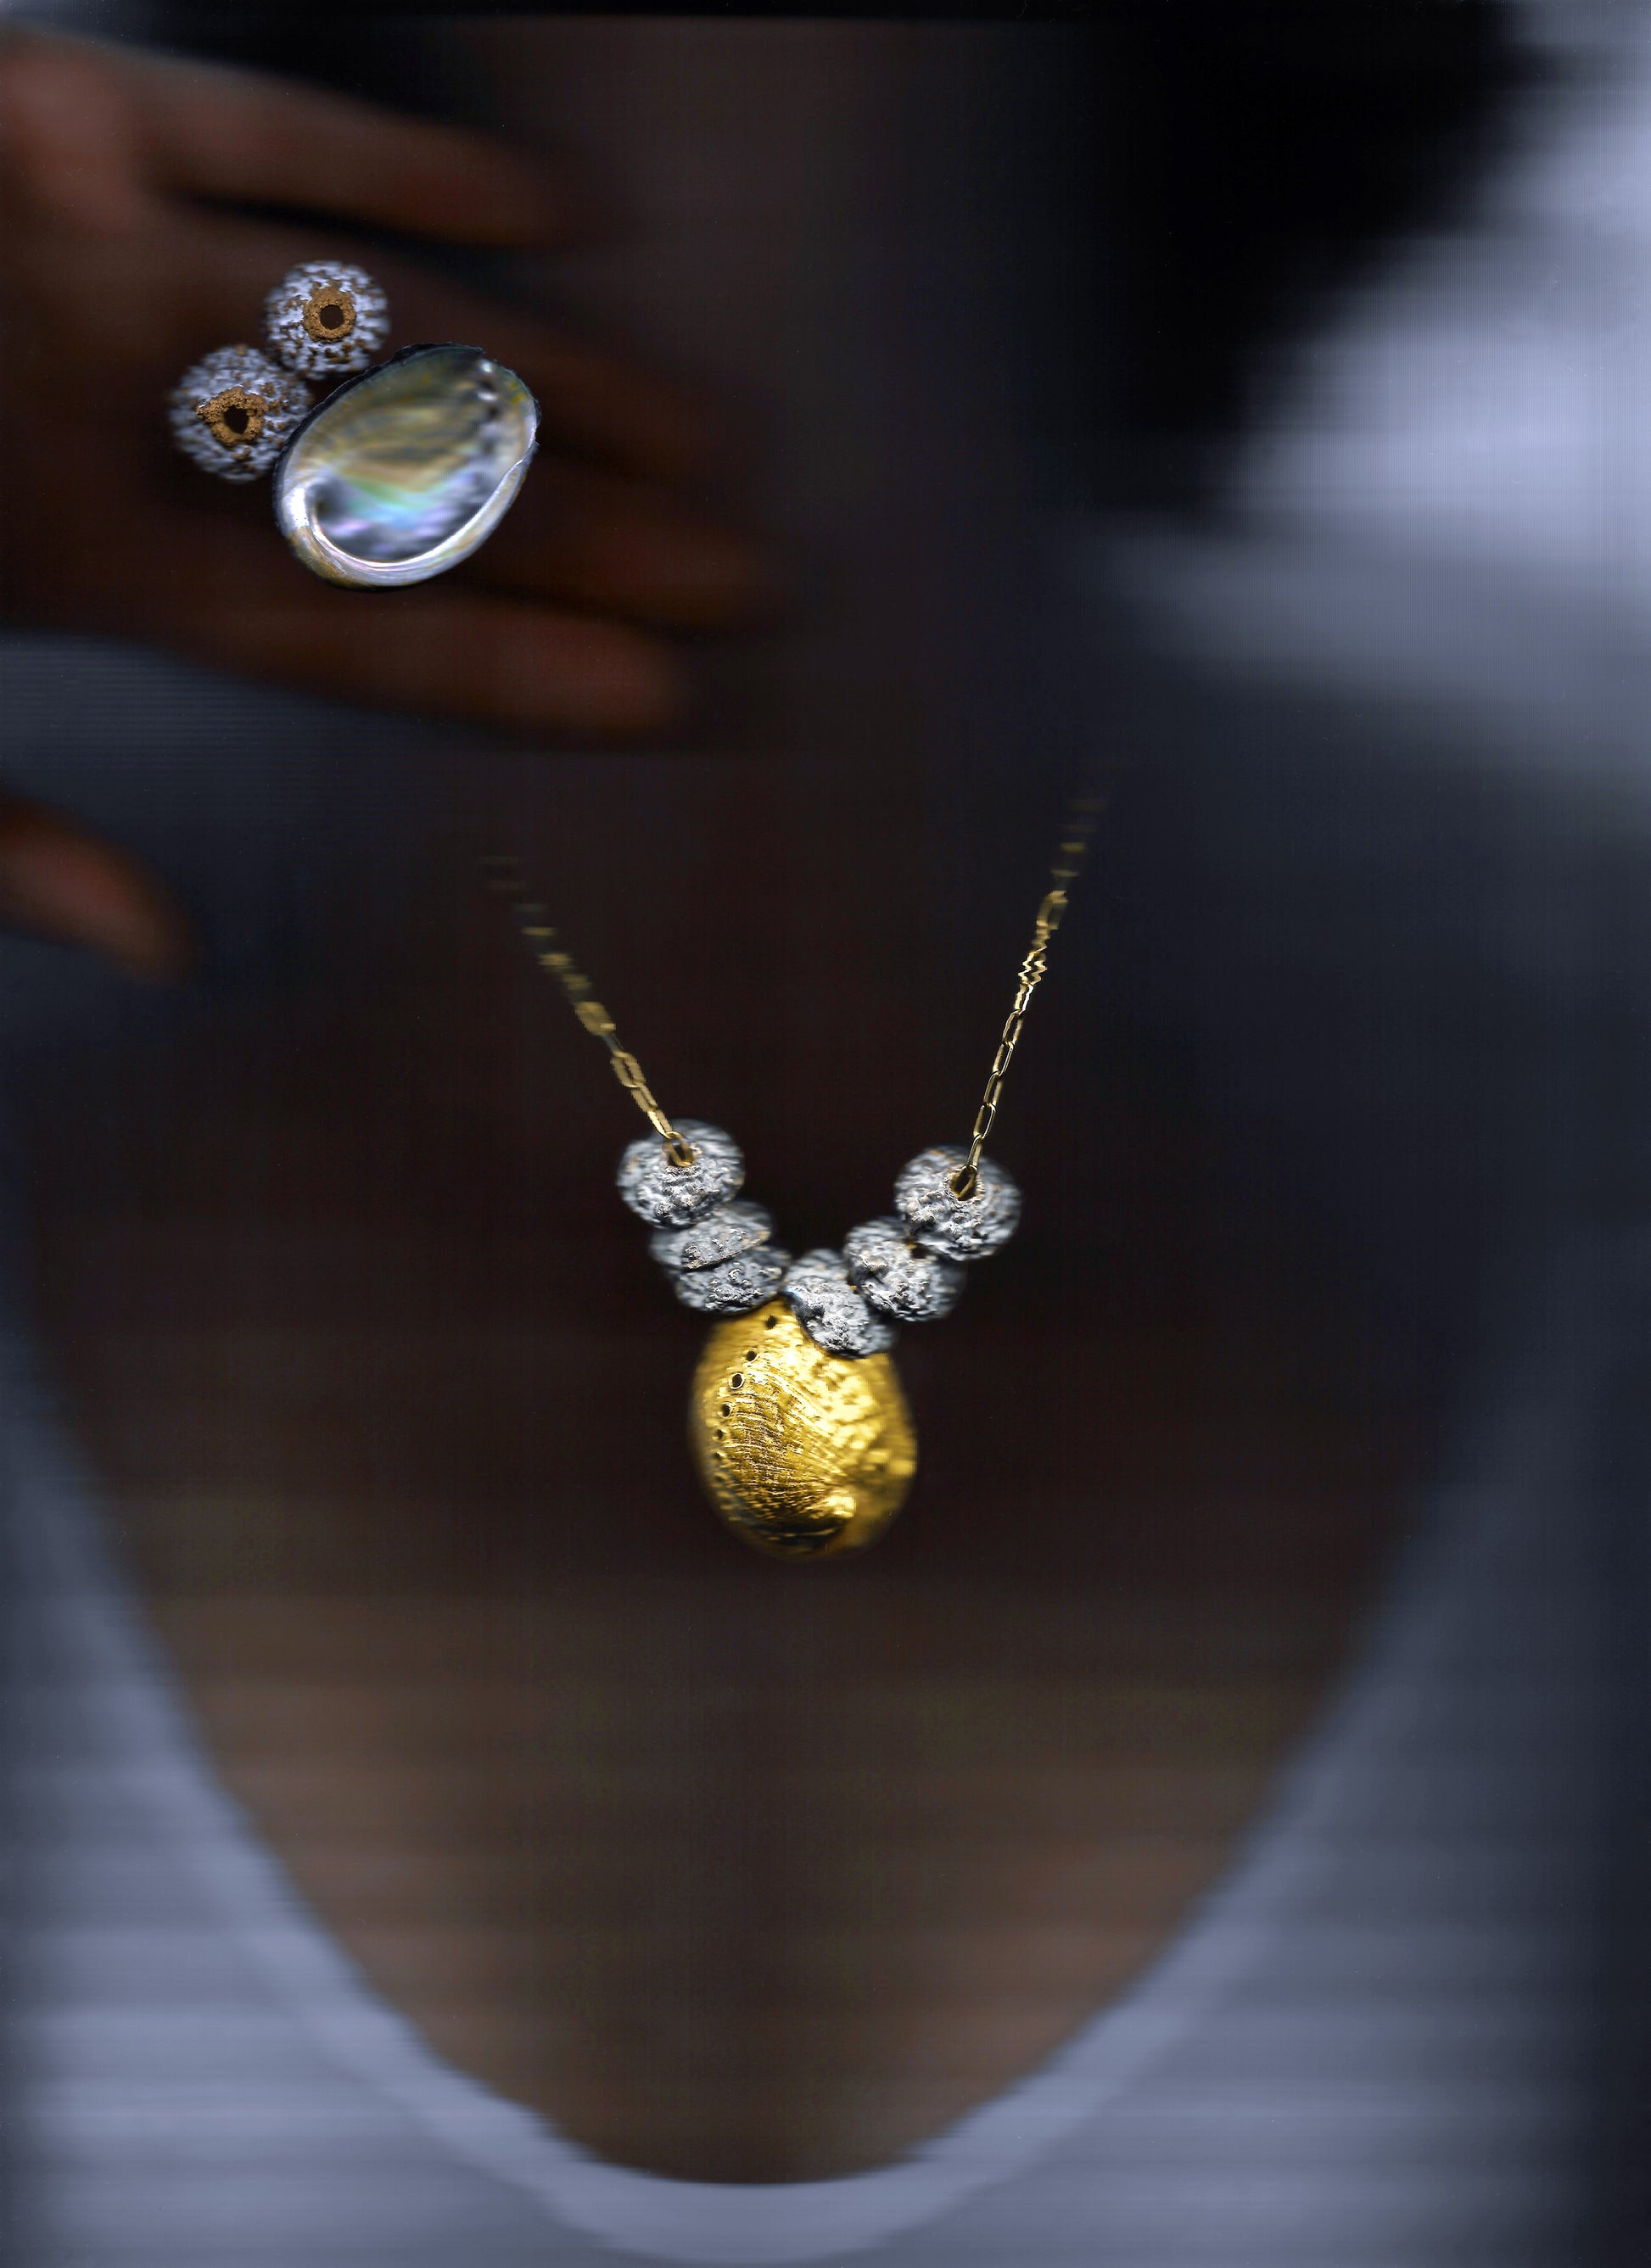 A sterling silver and gold vermeil necklace made from casts of eucalyptus seed caps and an abalone shell. Made by Violette Stehli.